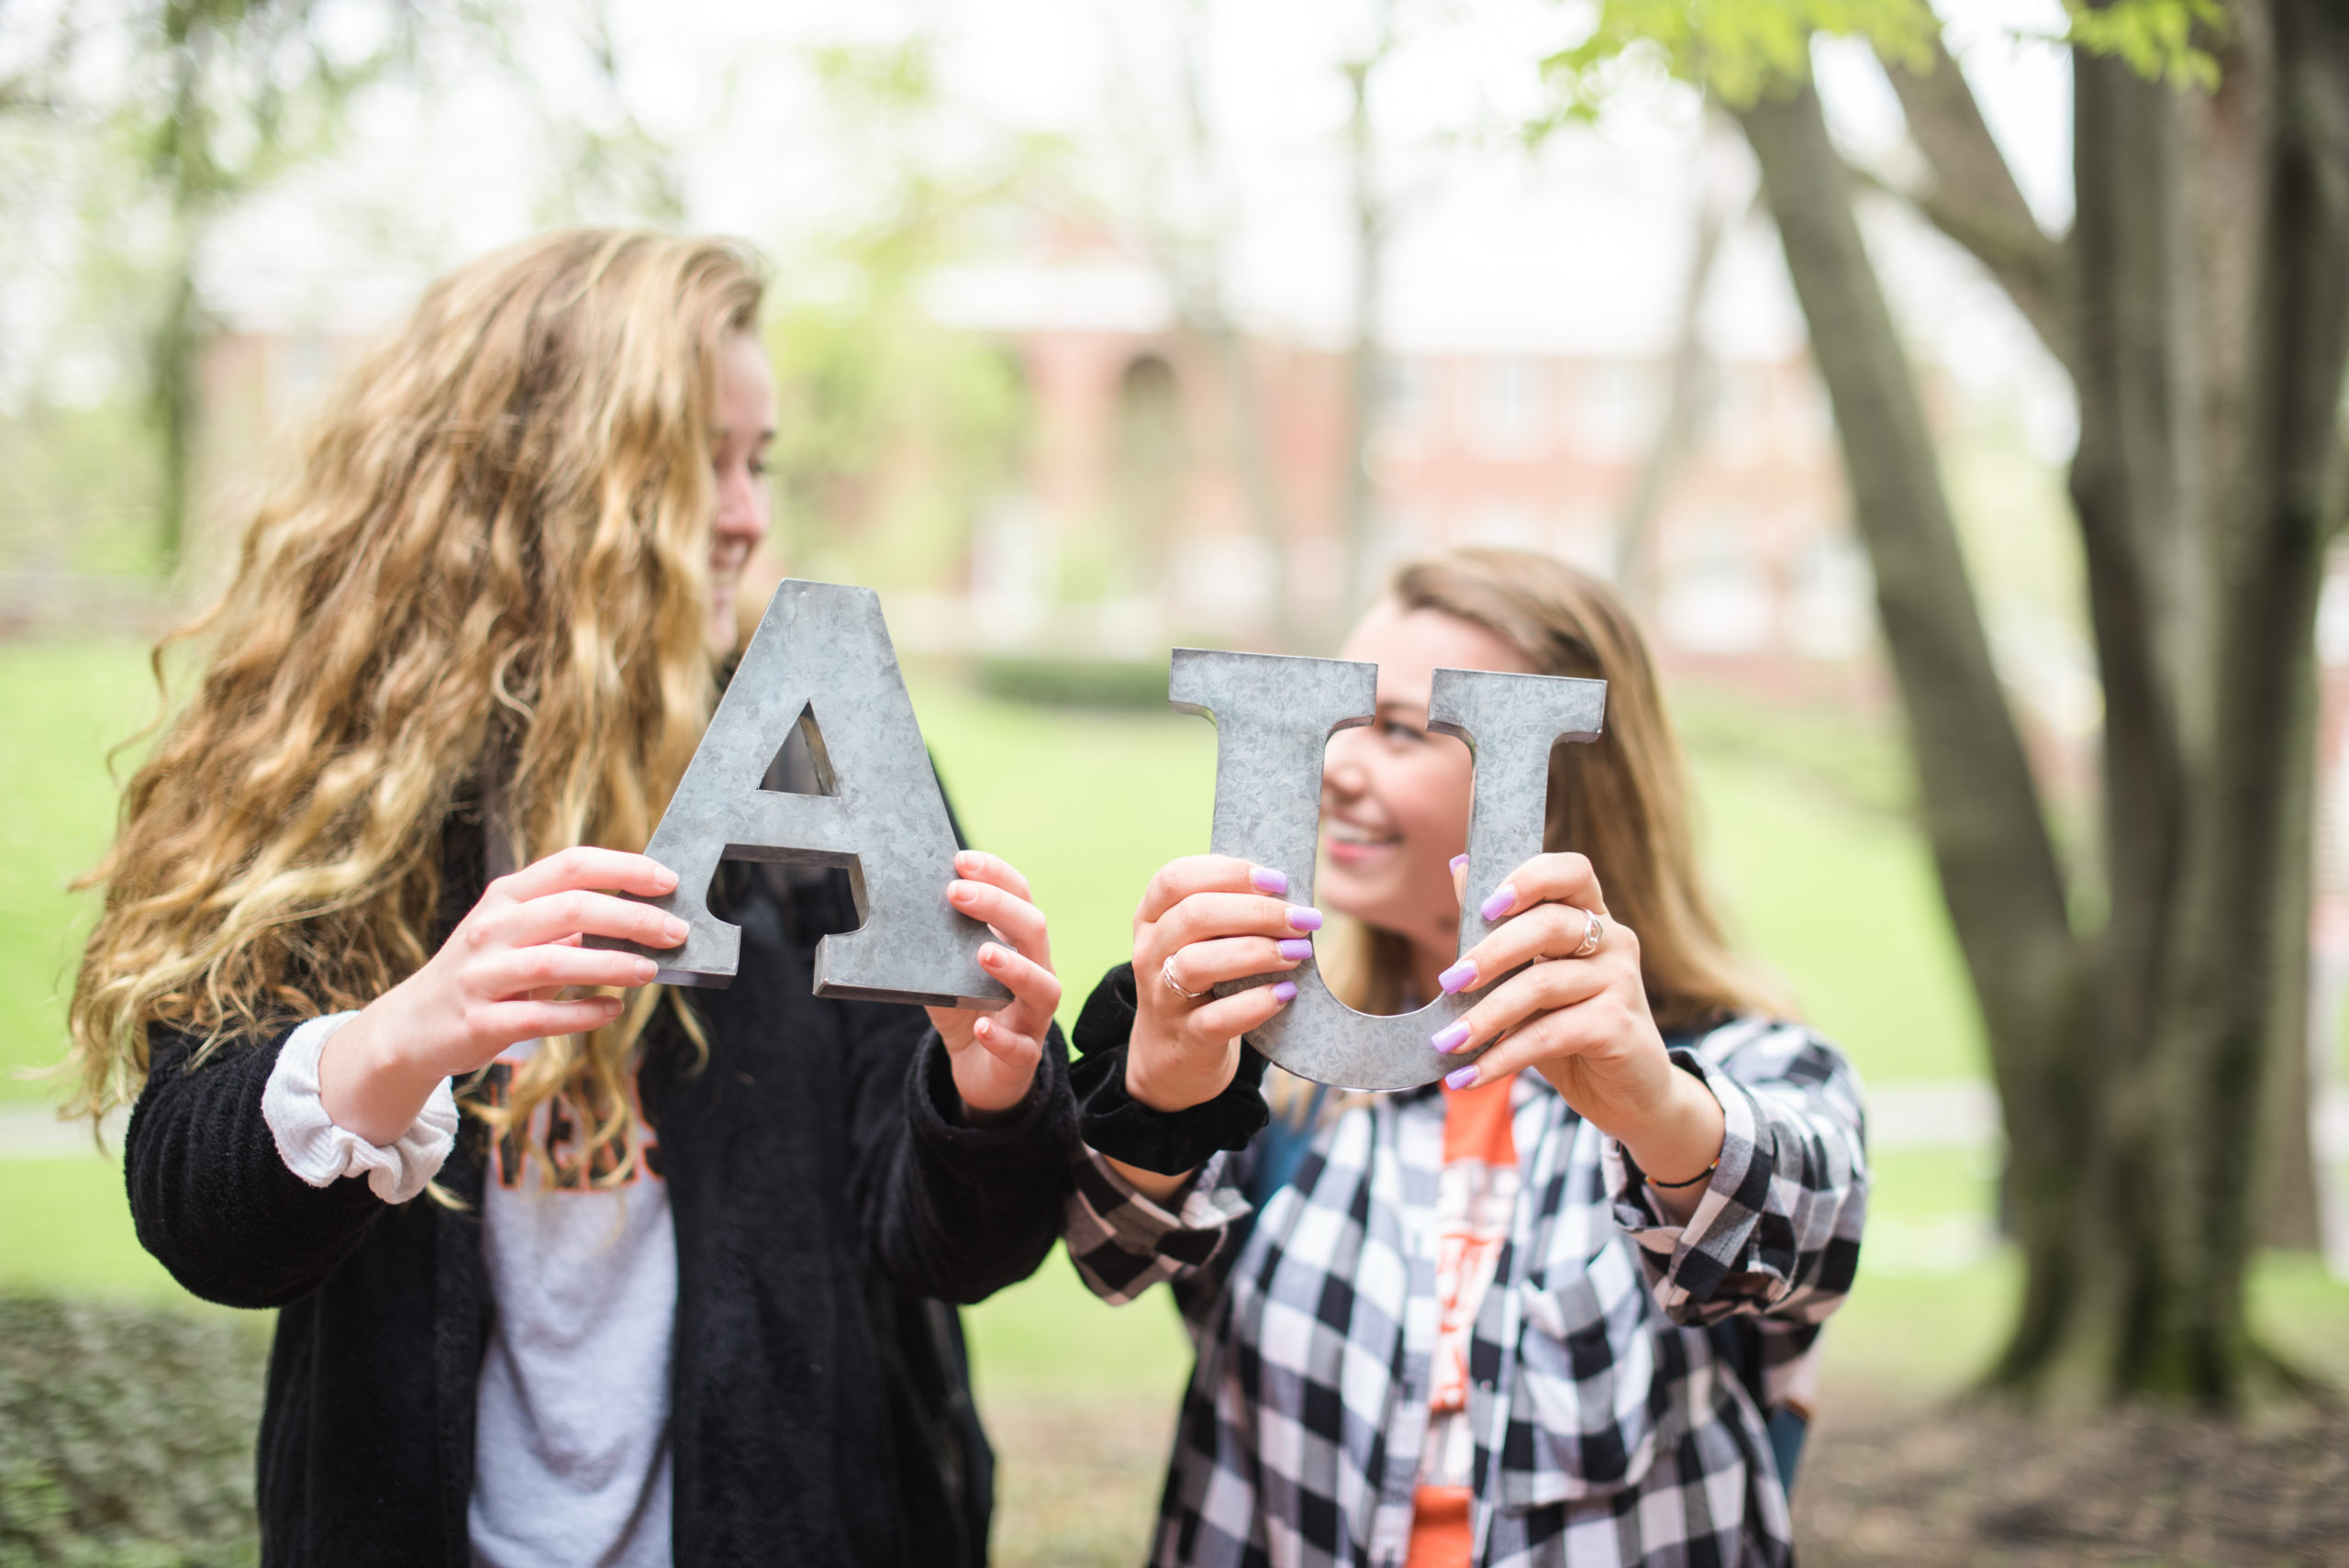 Two students holding the letters "A" and "U".